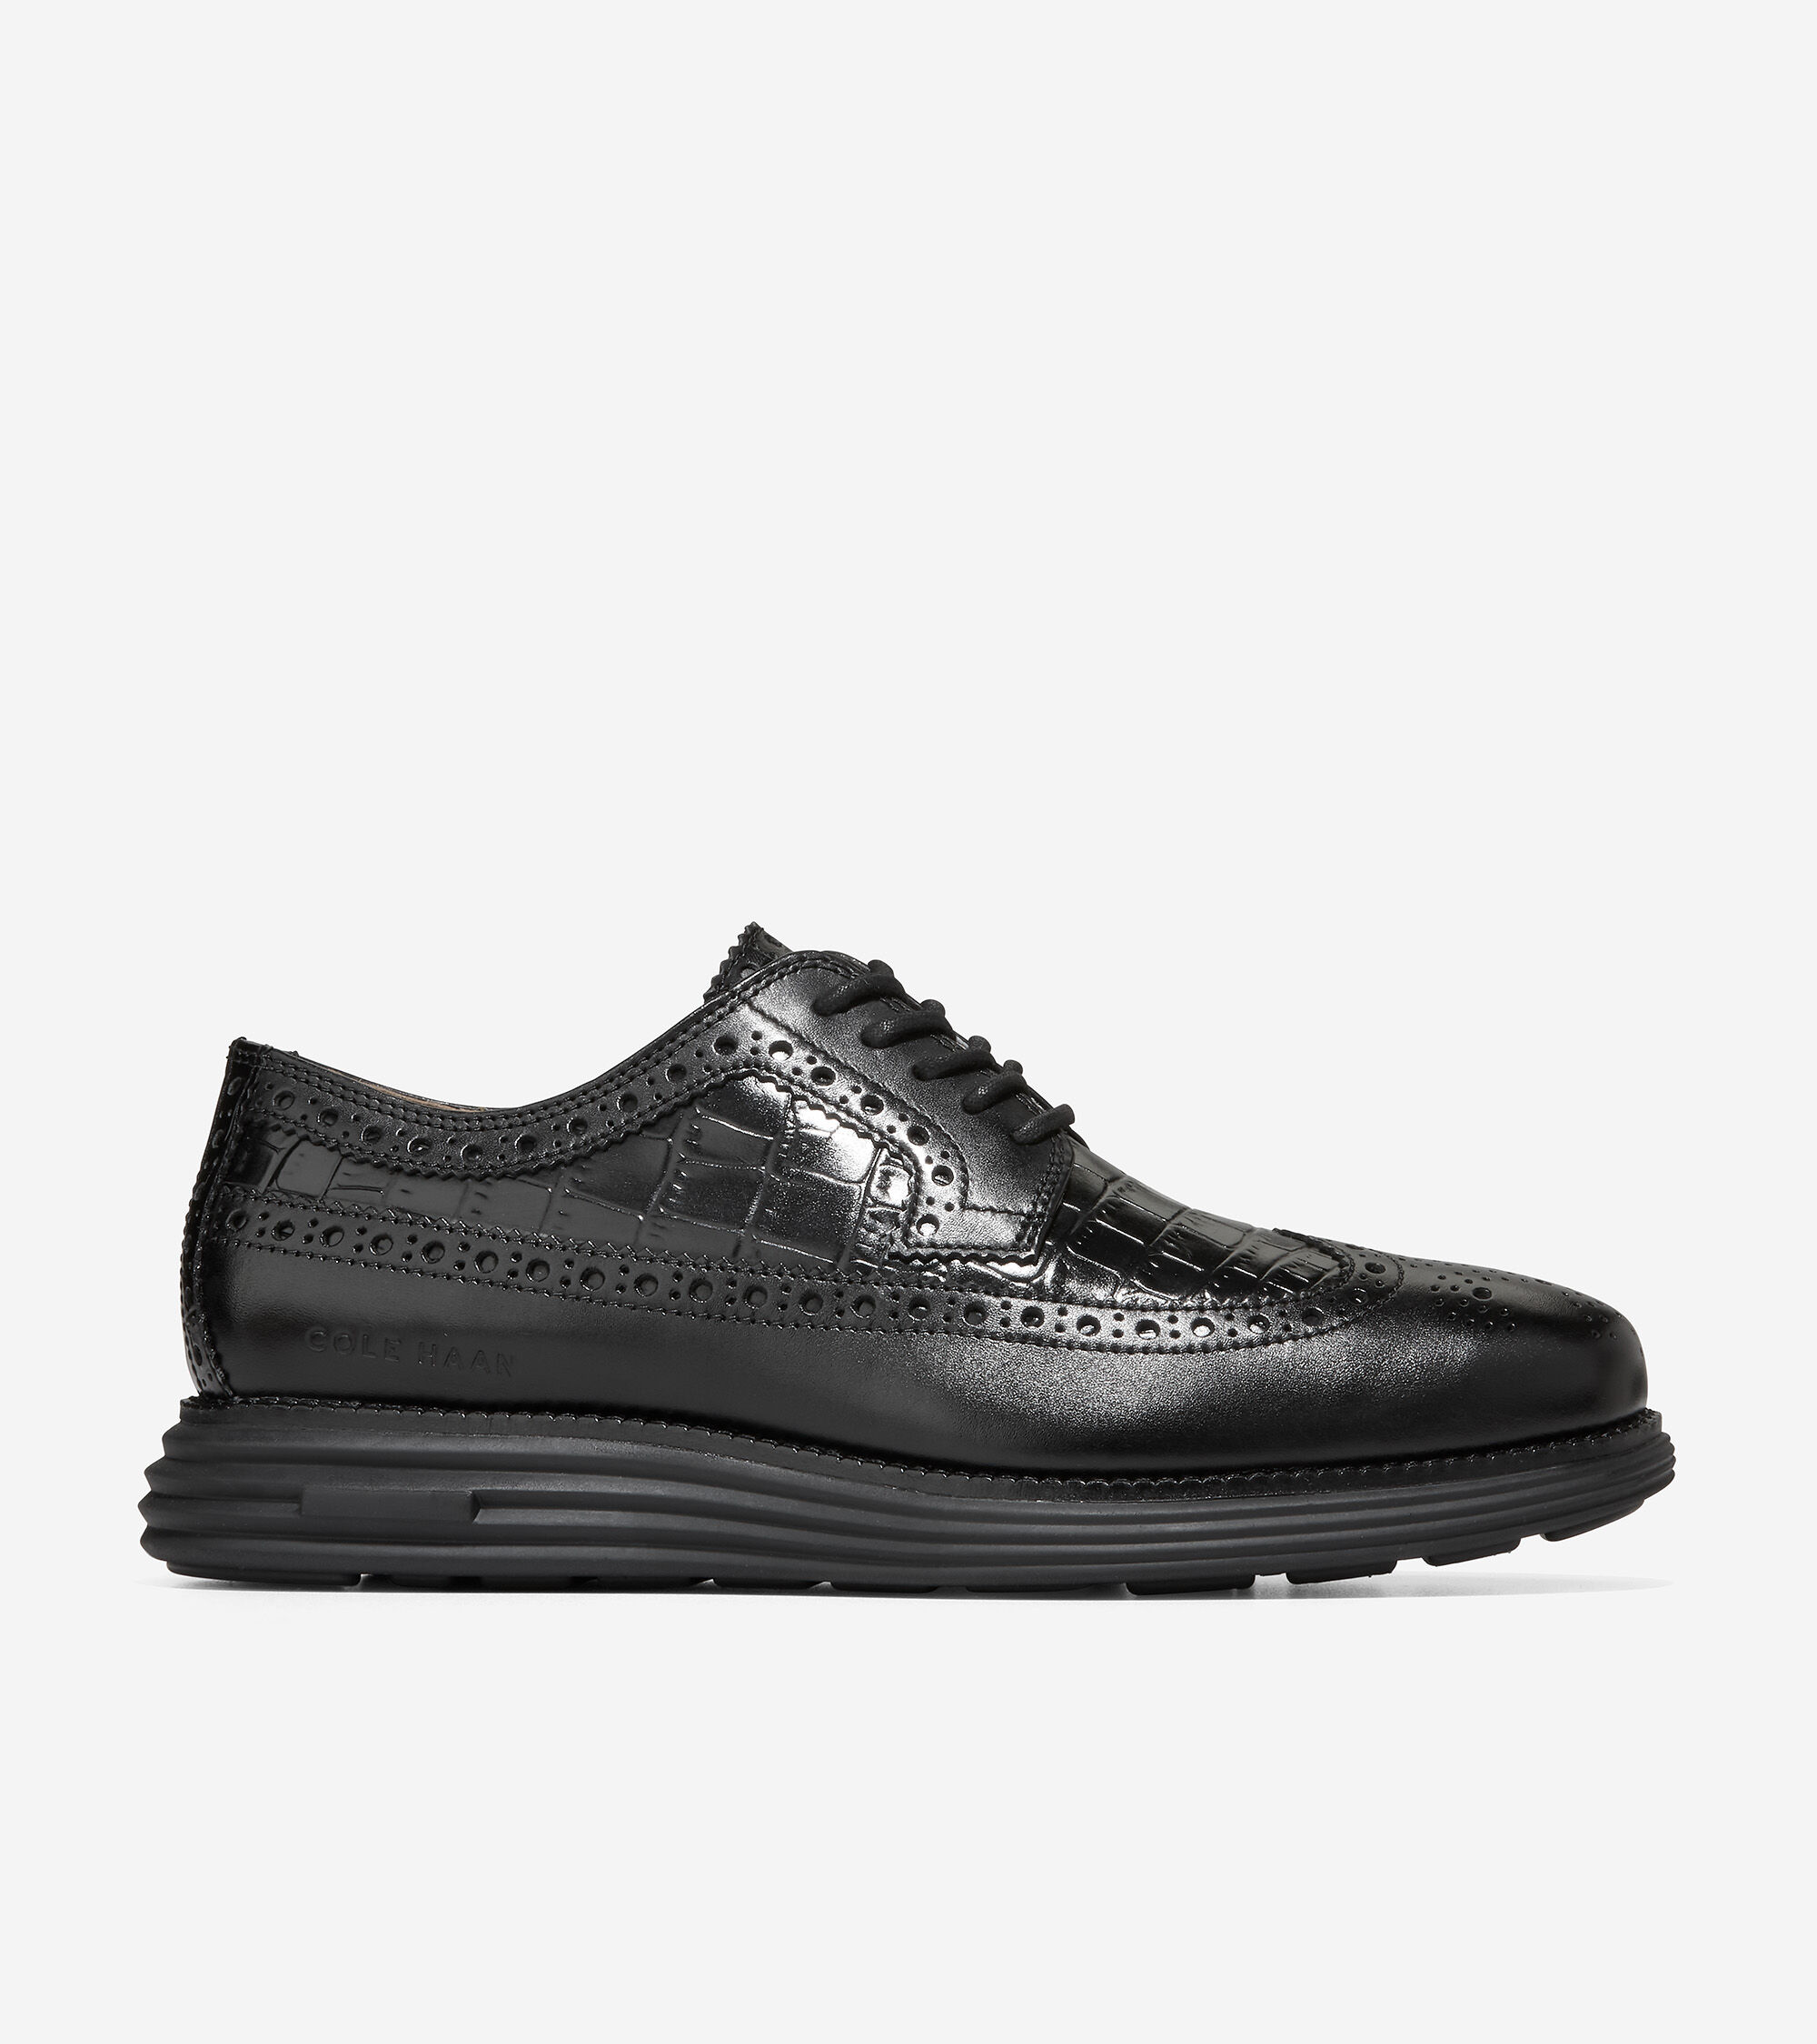 Black White Men's Two Tone Perforated Wing Tip Lace Up Oxford Dress Shoe Schoenen Herenschoenen Oxfords & Wingtips 